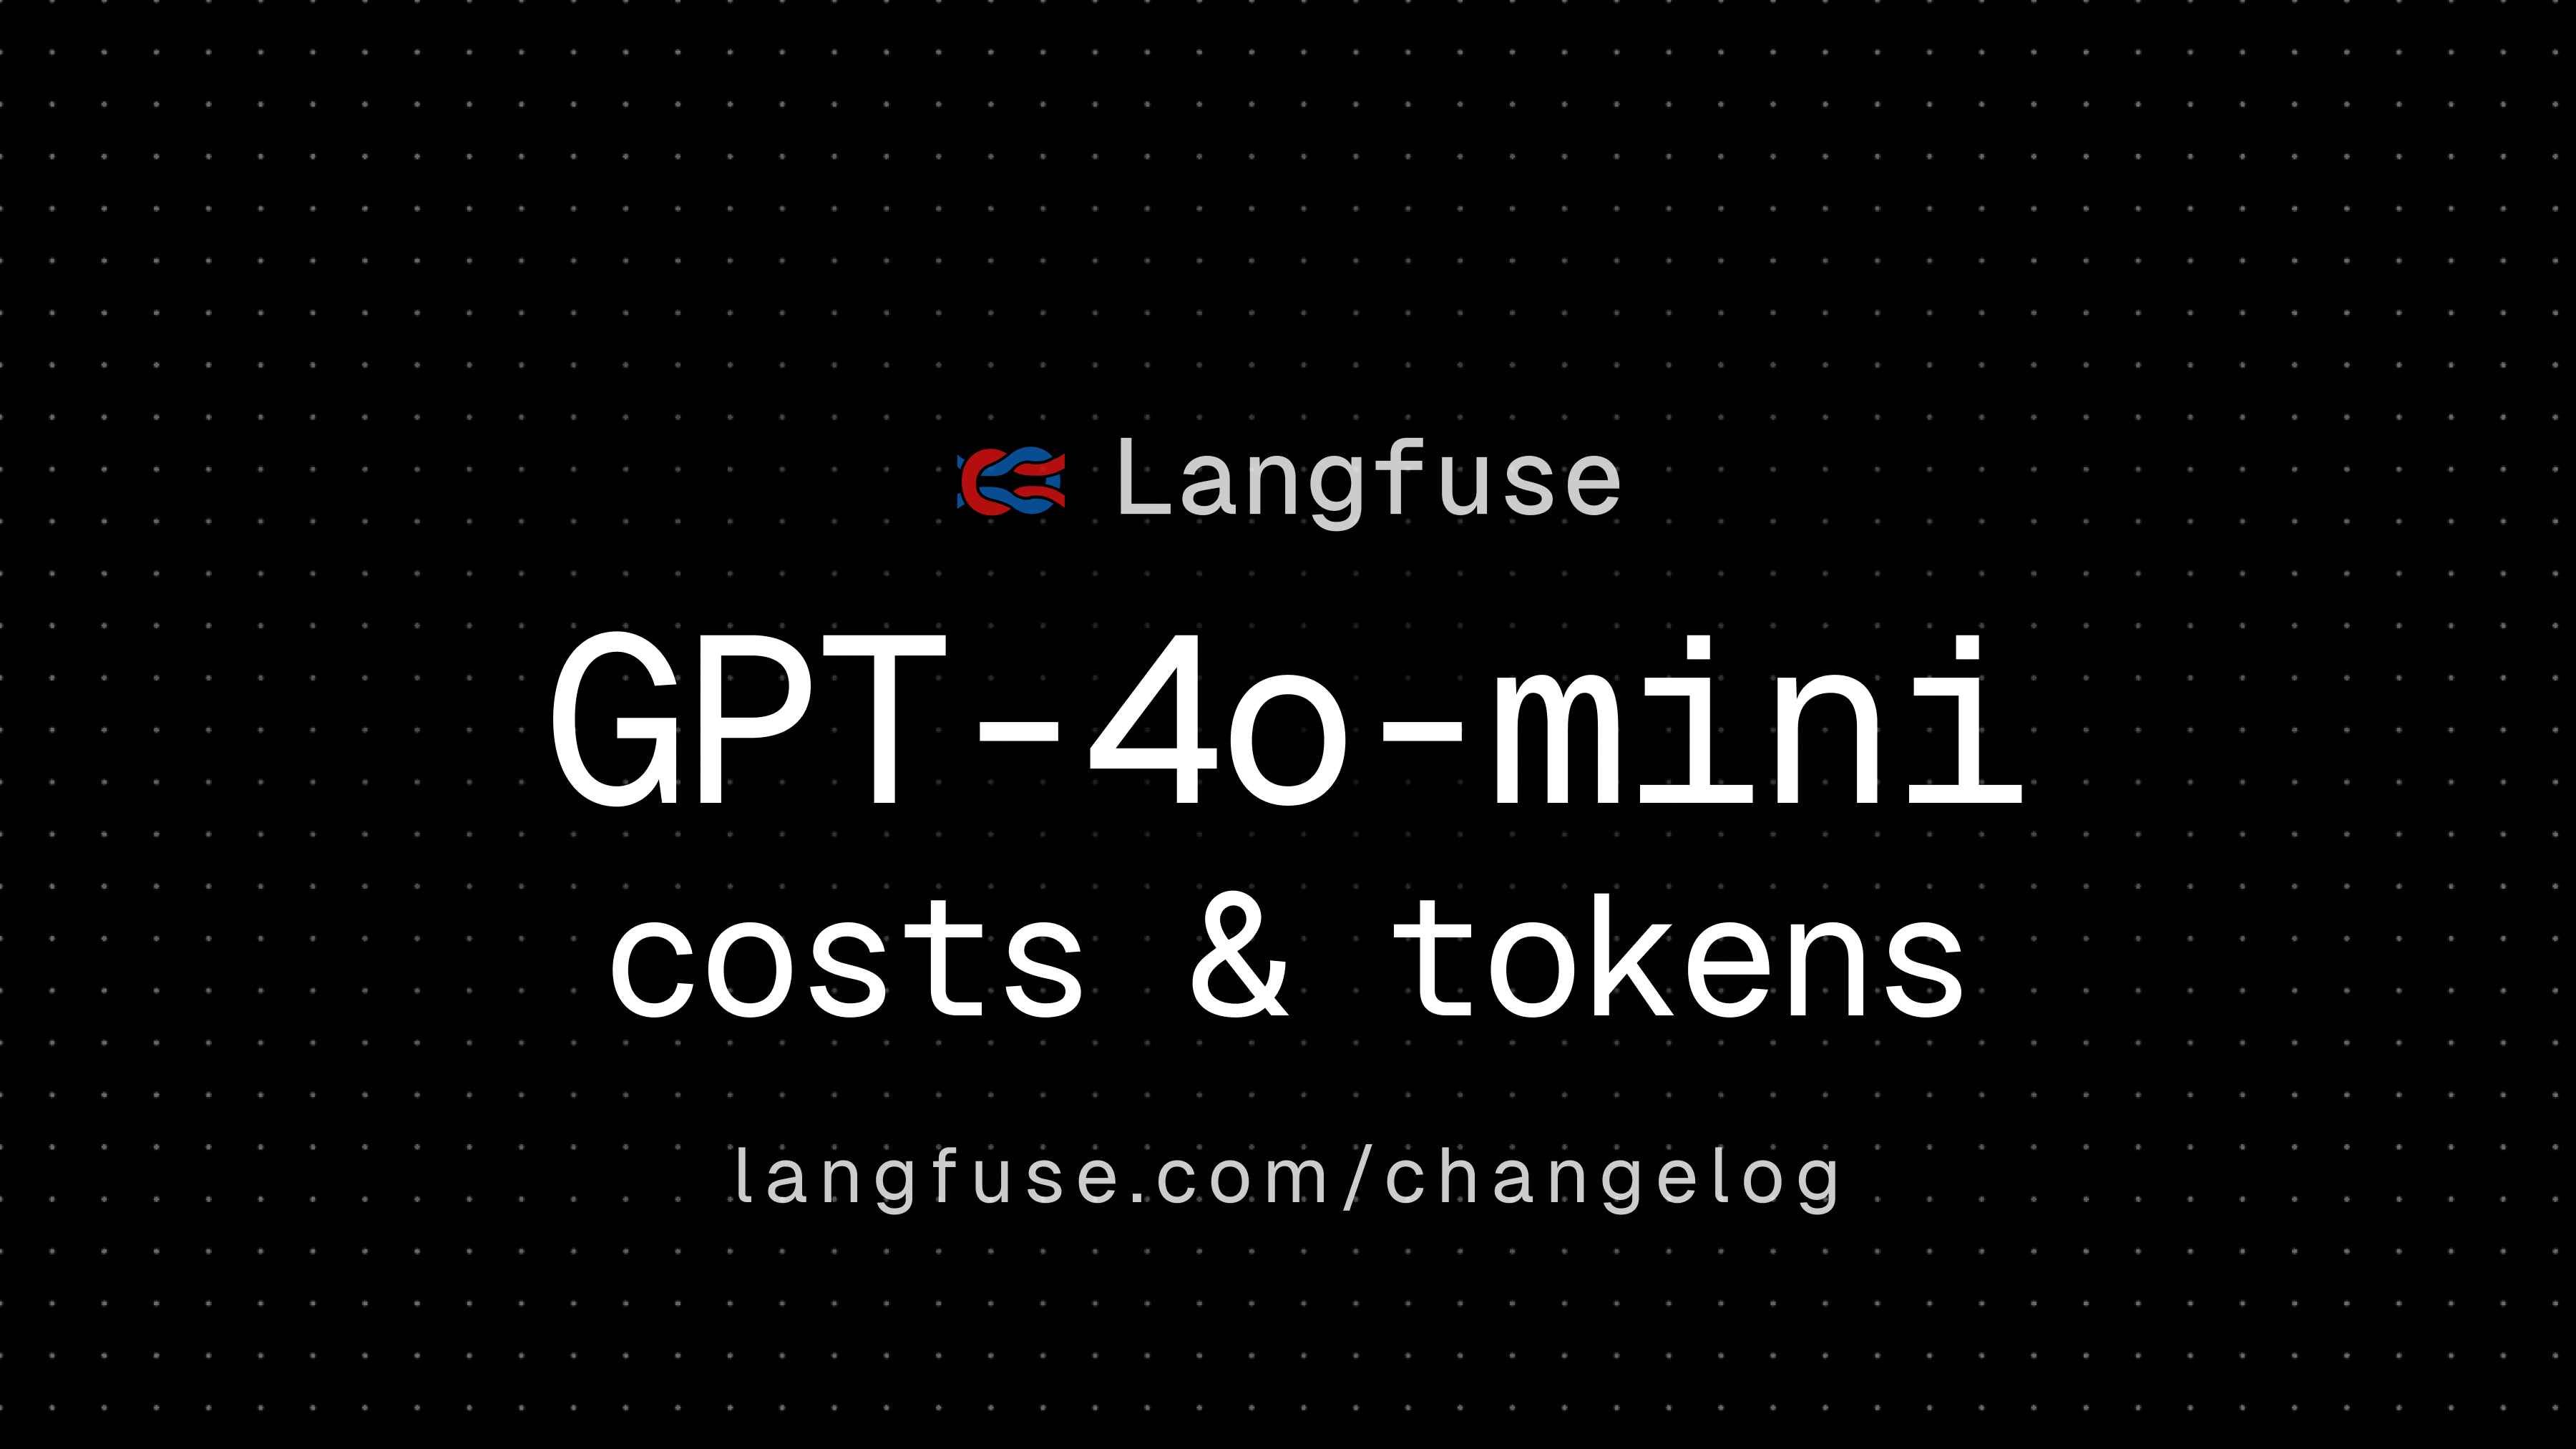 Token/cost tracking for GPT-4o mini